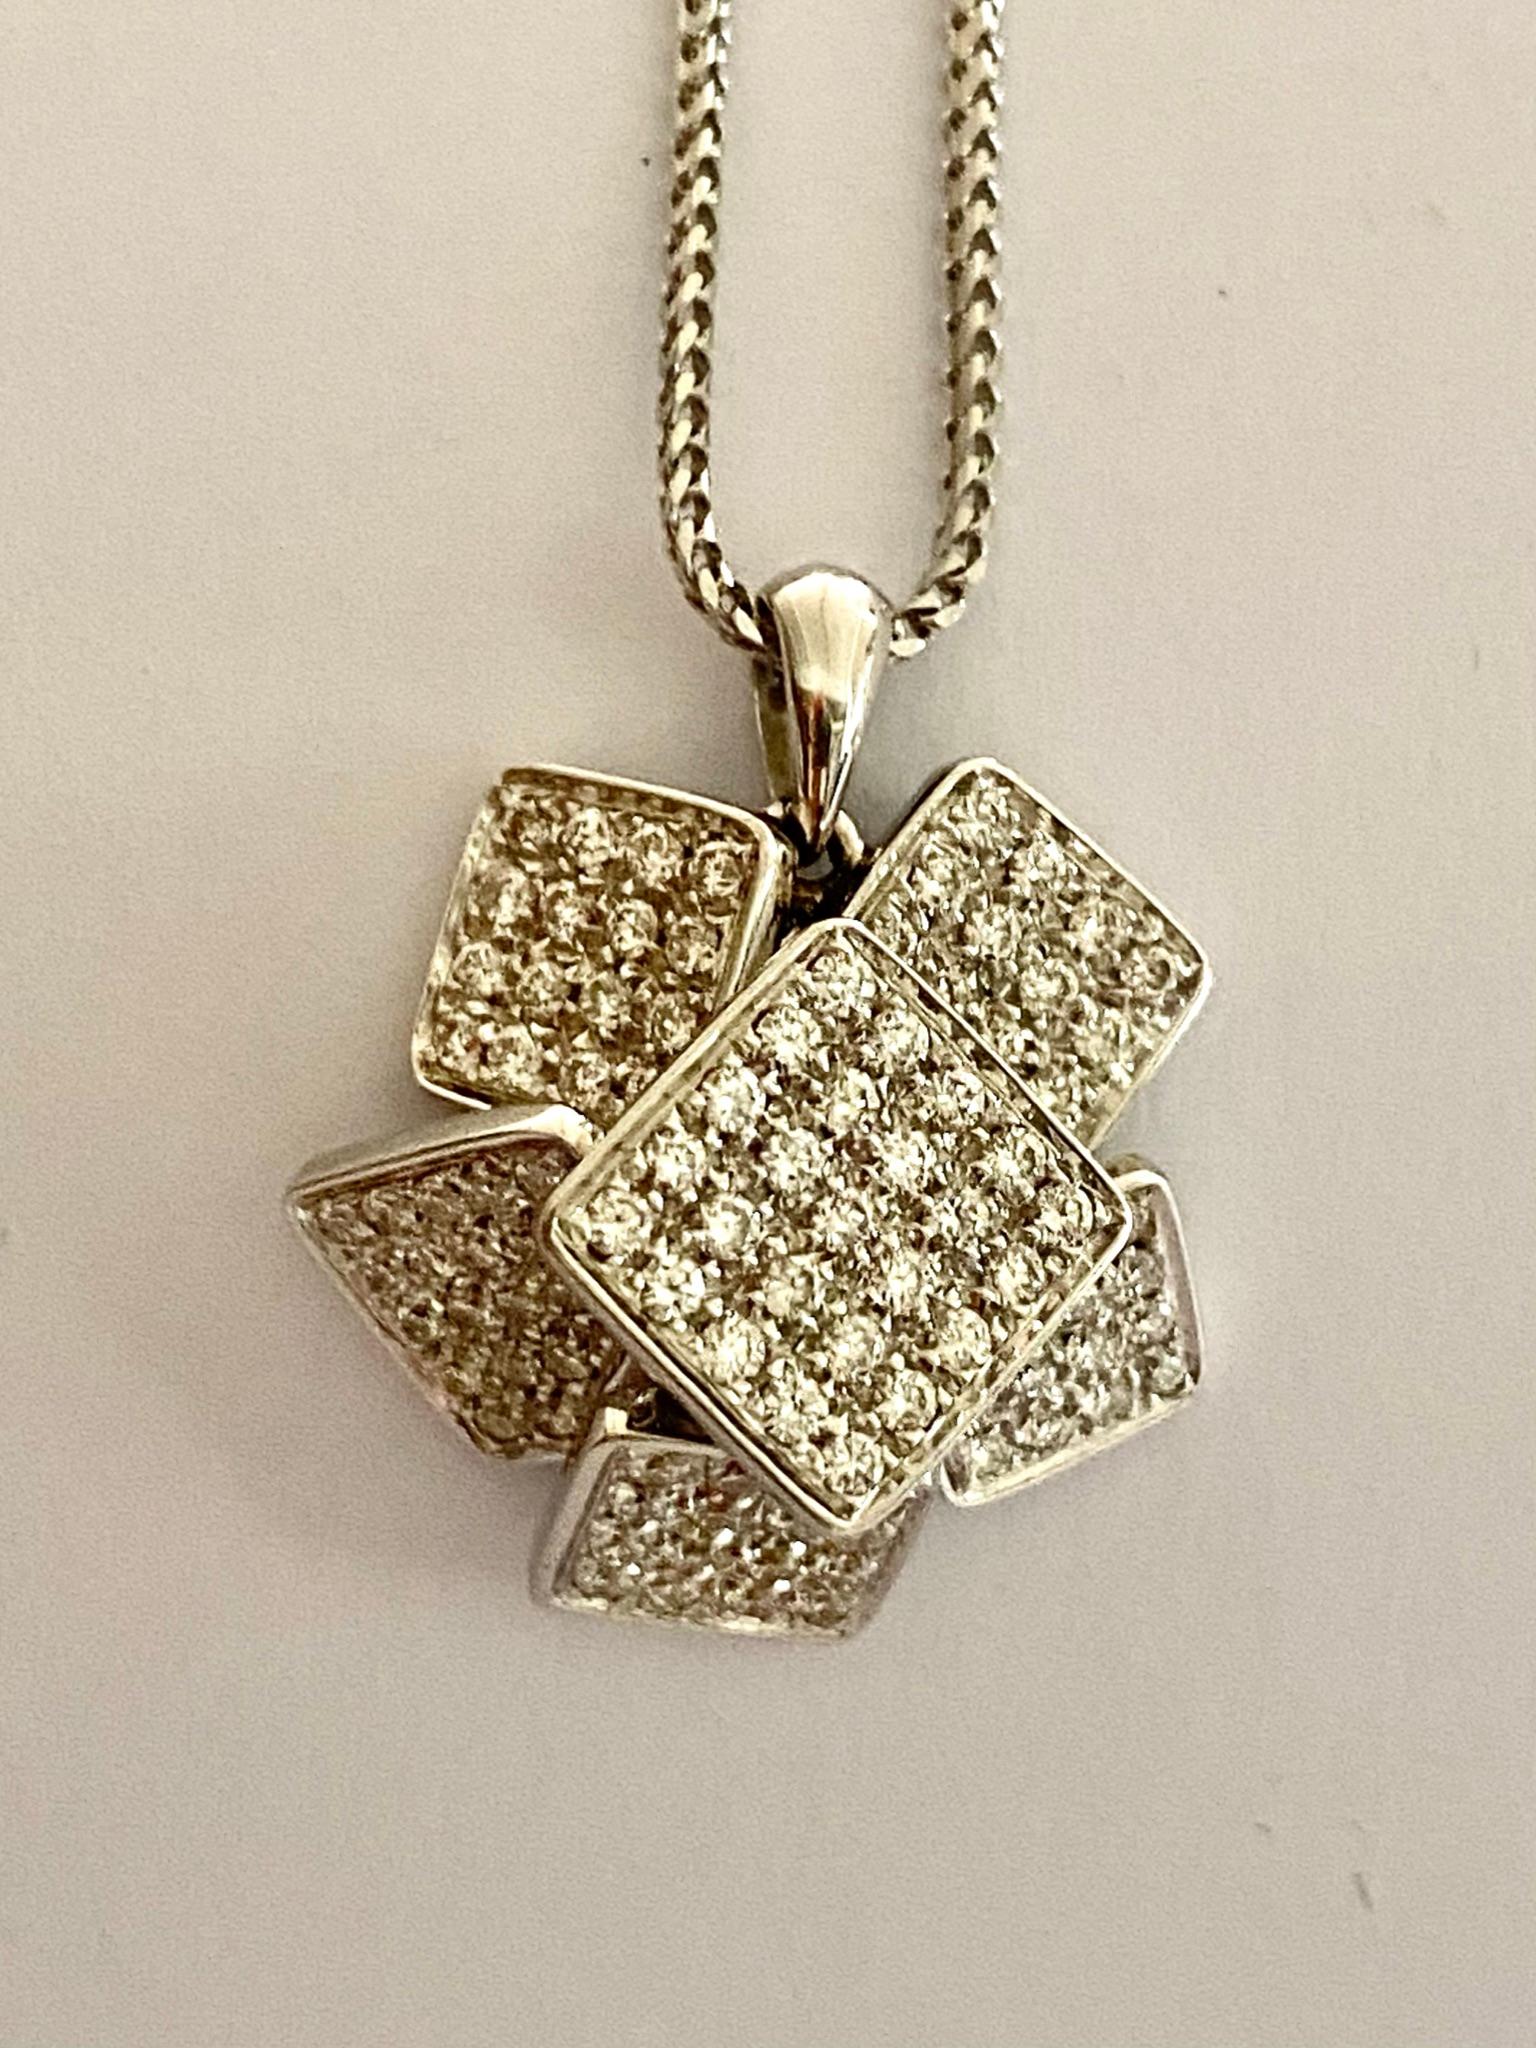 One (1) 18 Karat white Gold Pendant with Chain
stamped 750
107 (one hunderd and seven) round brilliant cut natural diamonds = 0.090 ct.  
Clarity grade; VS  Color Grade: F-G  (Top Wesselton)
Lenght of the cahin 42 cm. (including lock)
Total Weight: